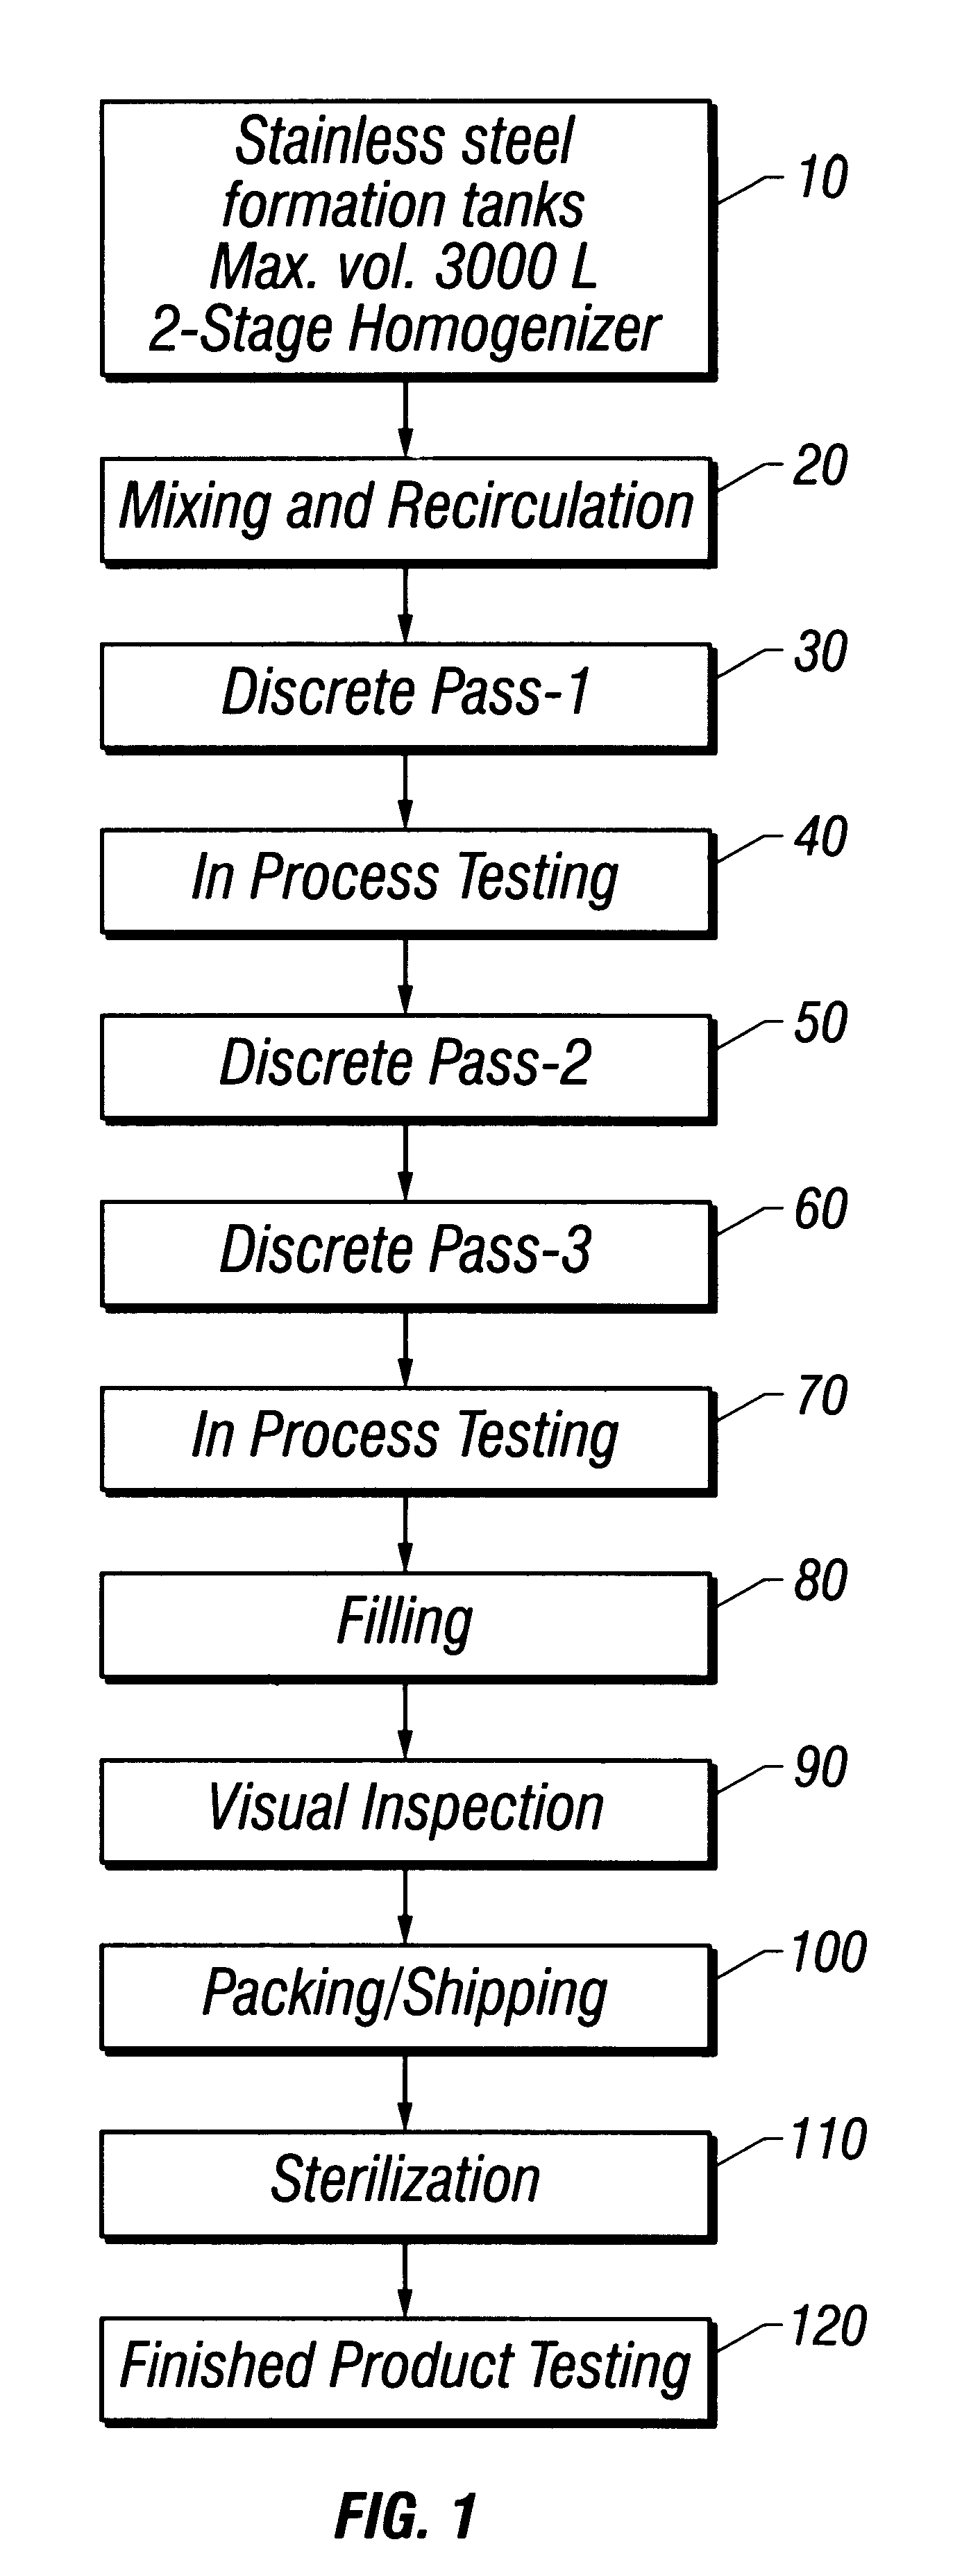 Phospholipid-coated microcrystals for the sustained release of pharmacologically active compounds and methods of their manufacture and use